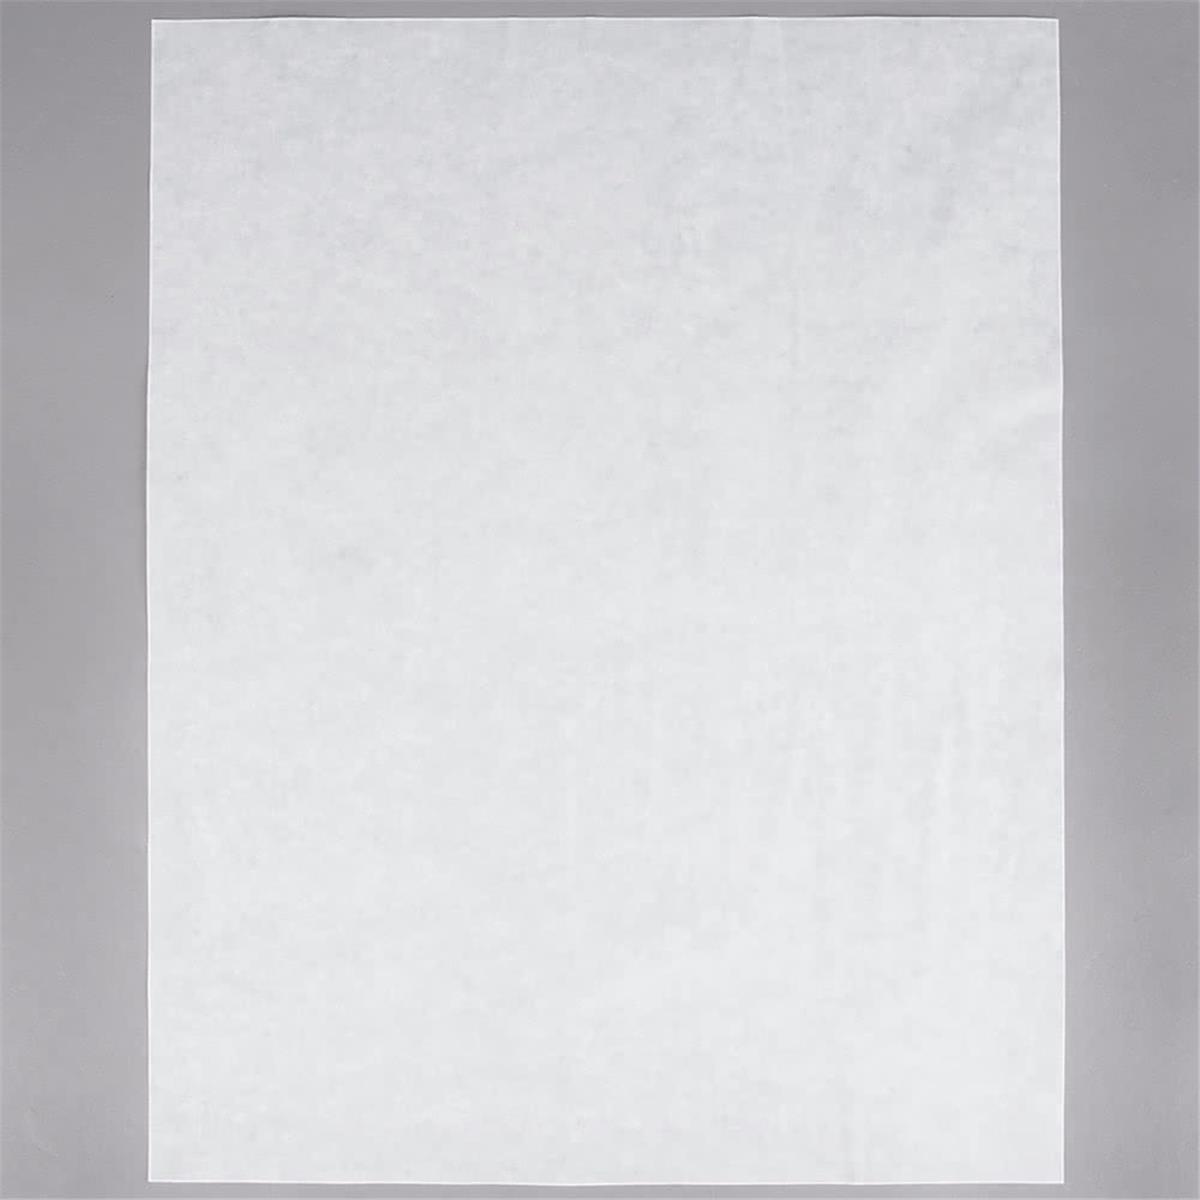 1520dry Cpc 15 X 20 In. Dry Wax Sheets, White - Case Of 1674